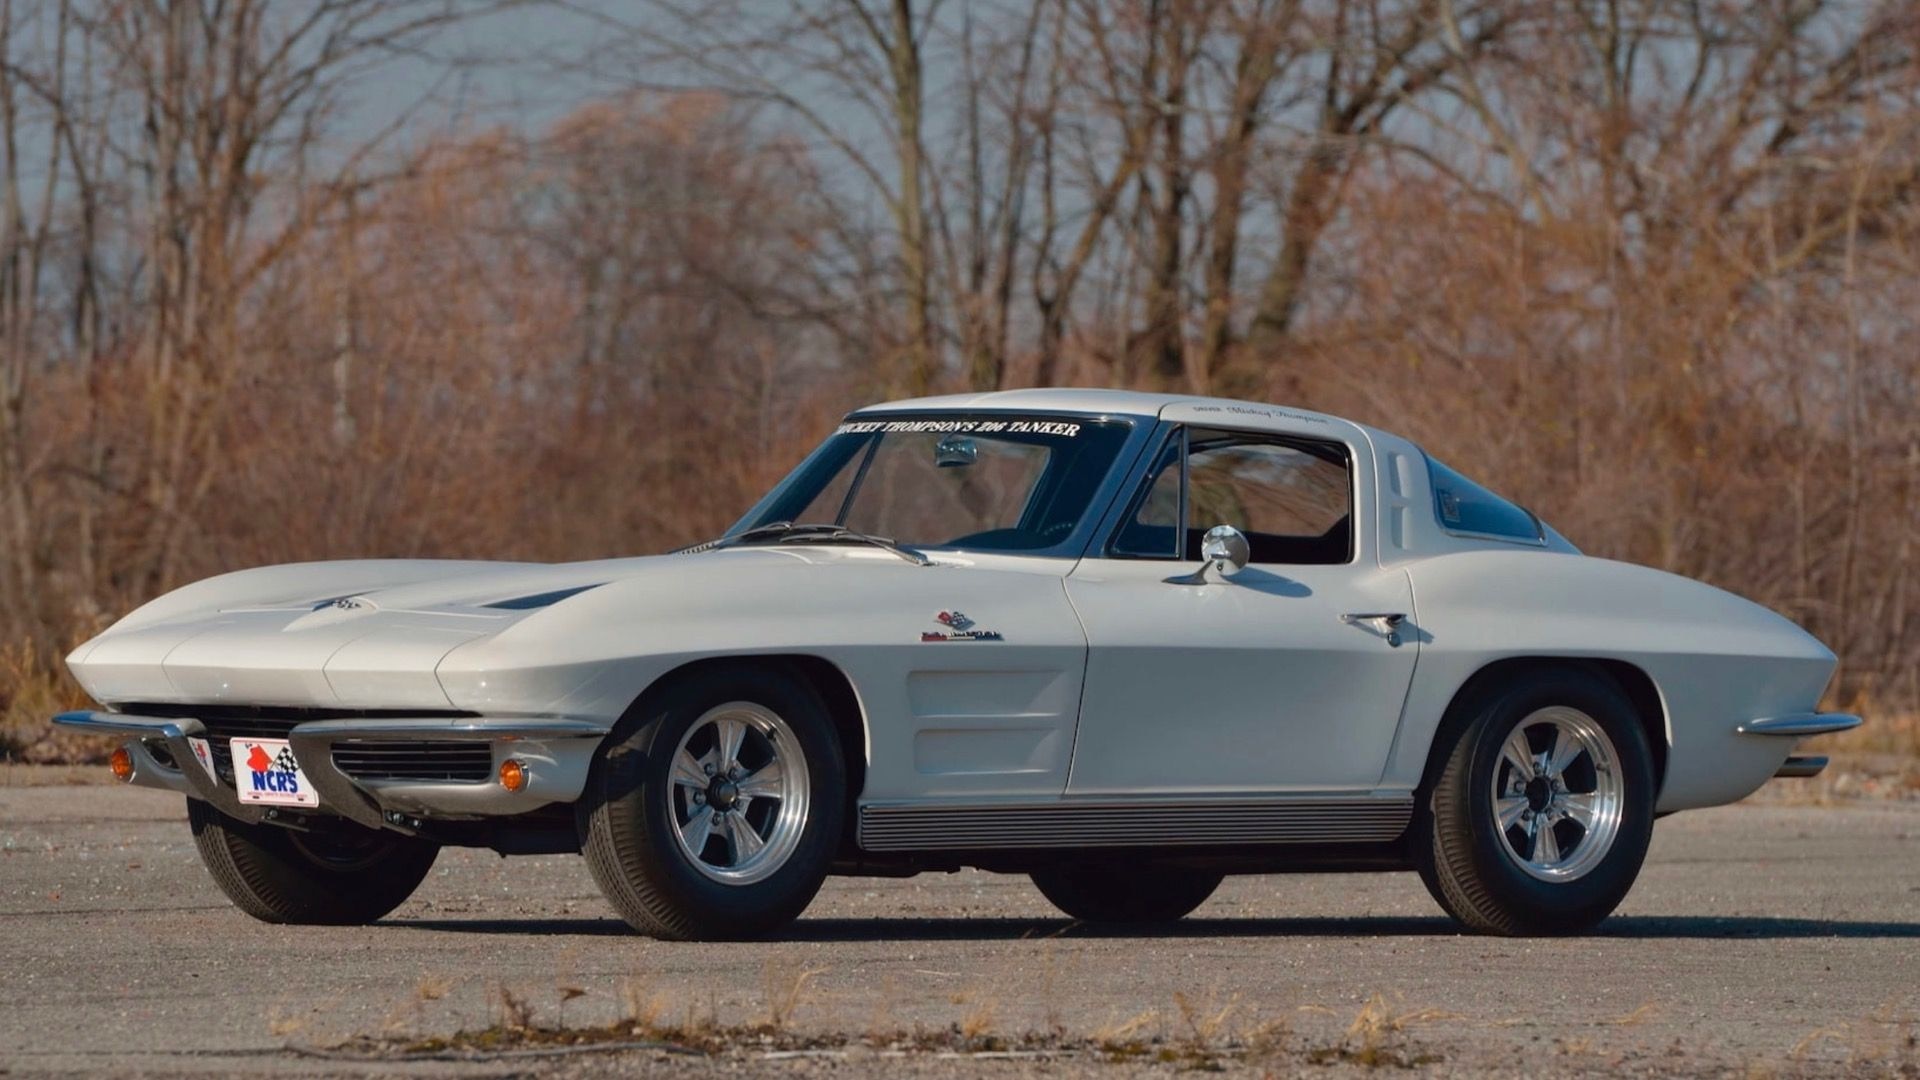 1963 Corvette Chevrolet Corvette Z06 owned by Mickey Thompson (Photo by Mecum Auctions)